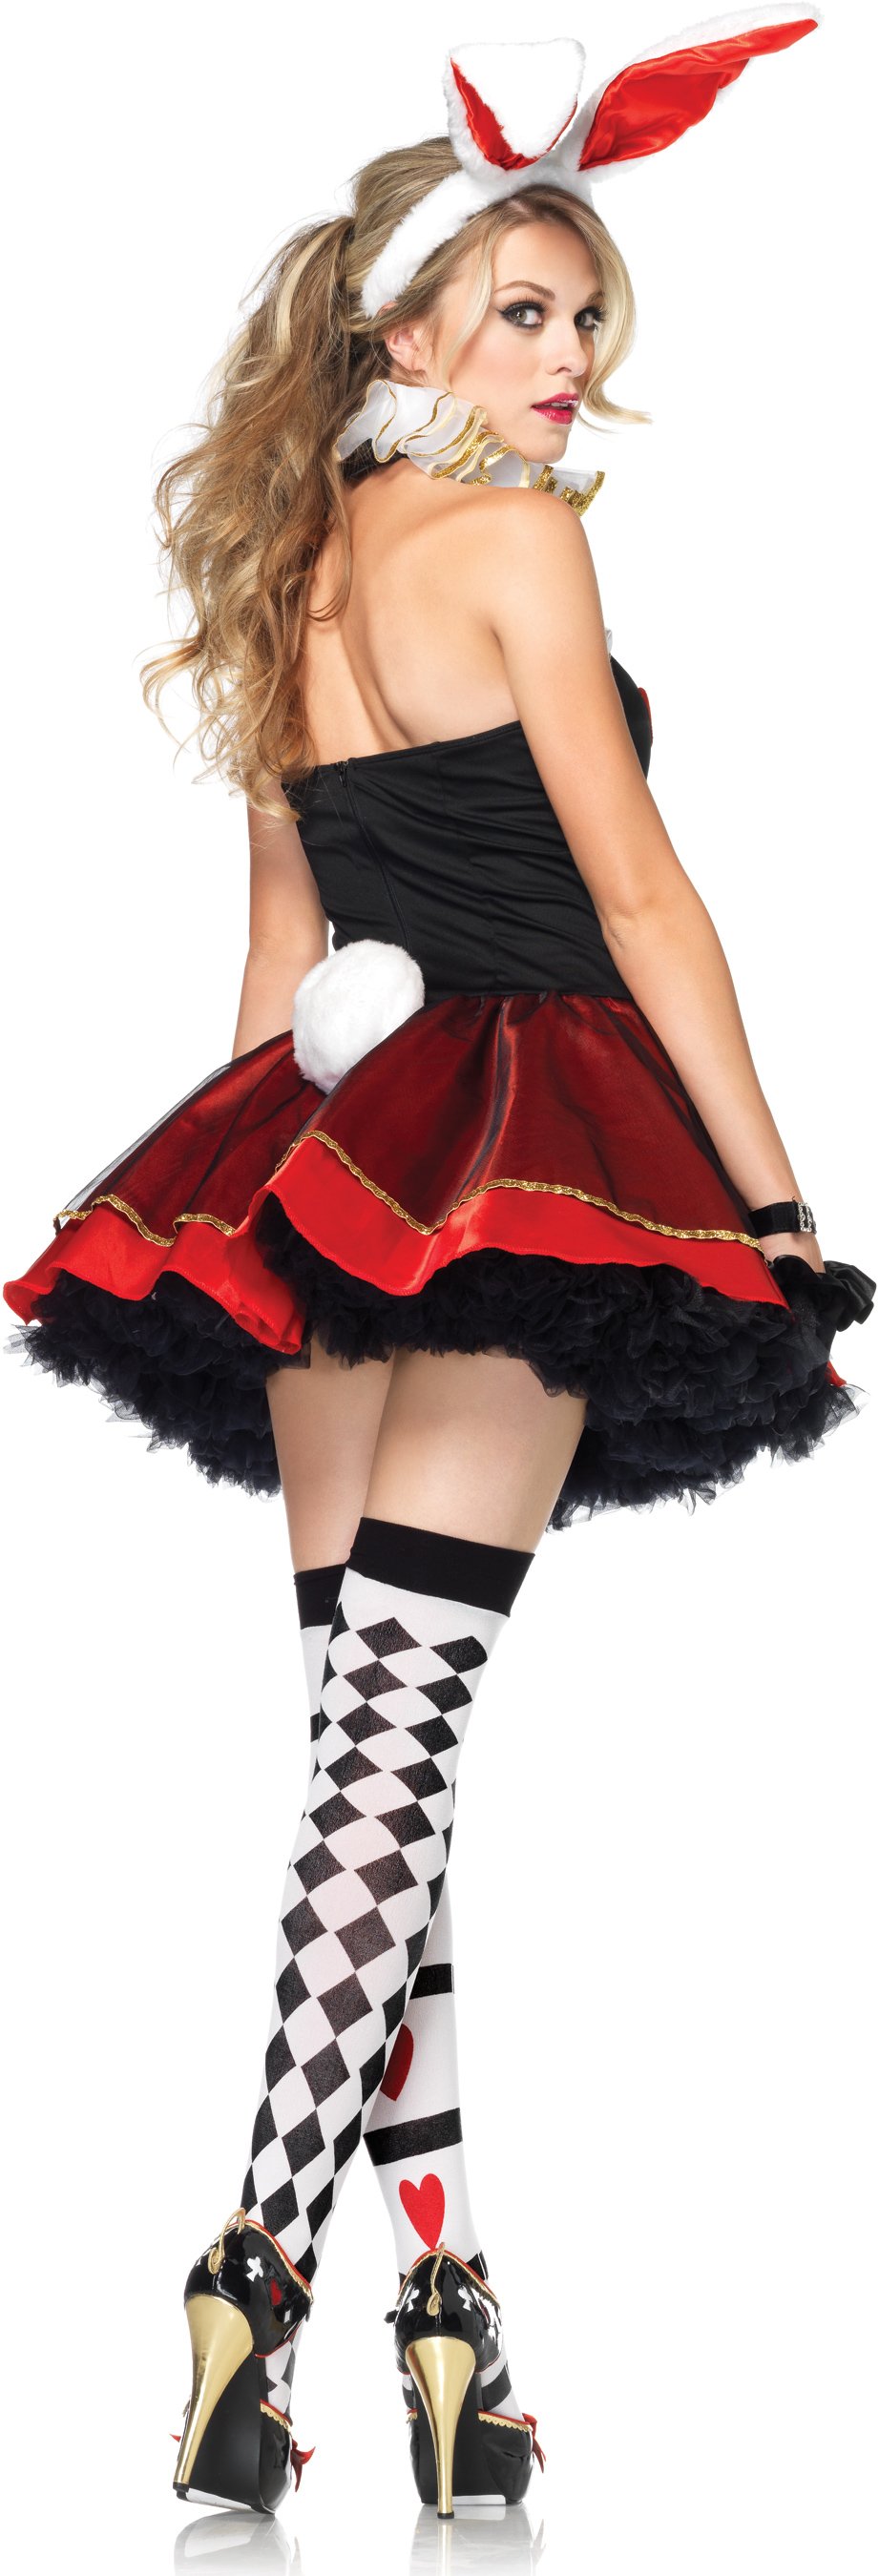 Tea Party Bunny Adult Costume